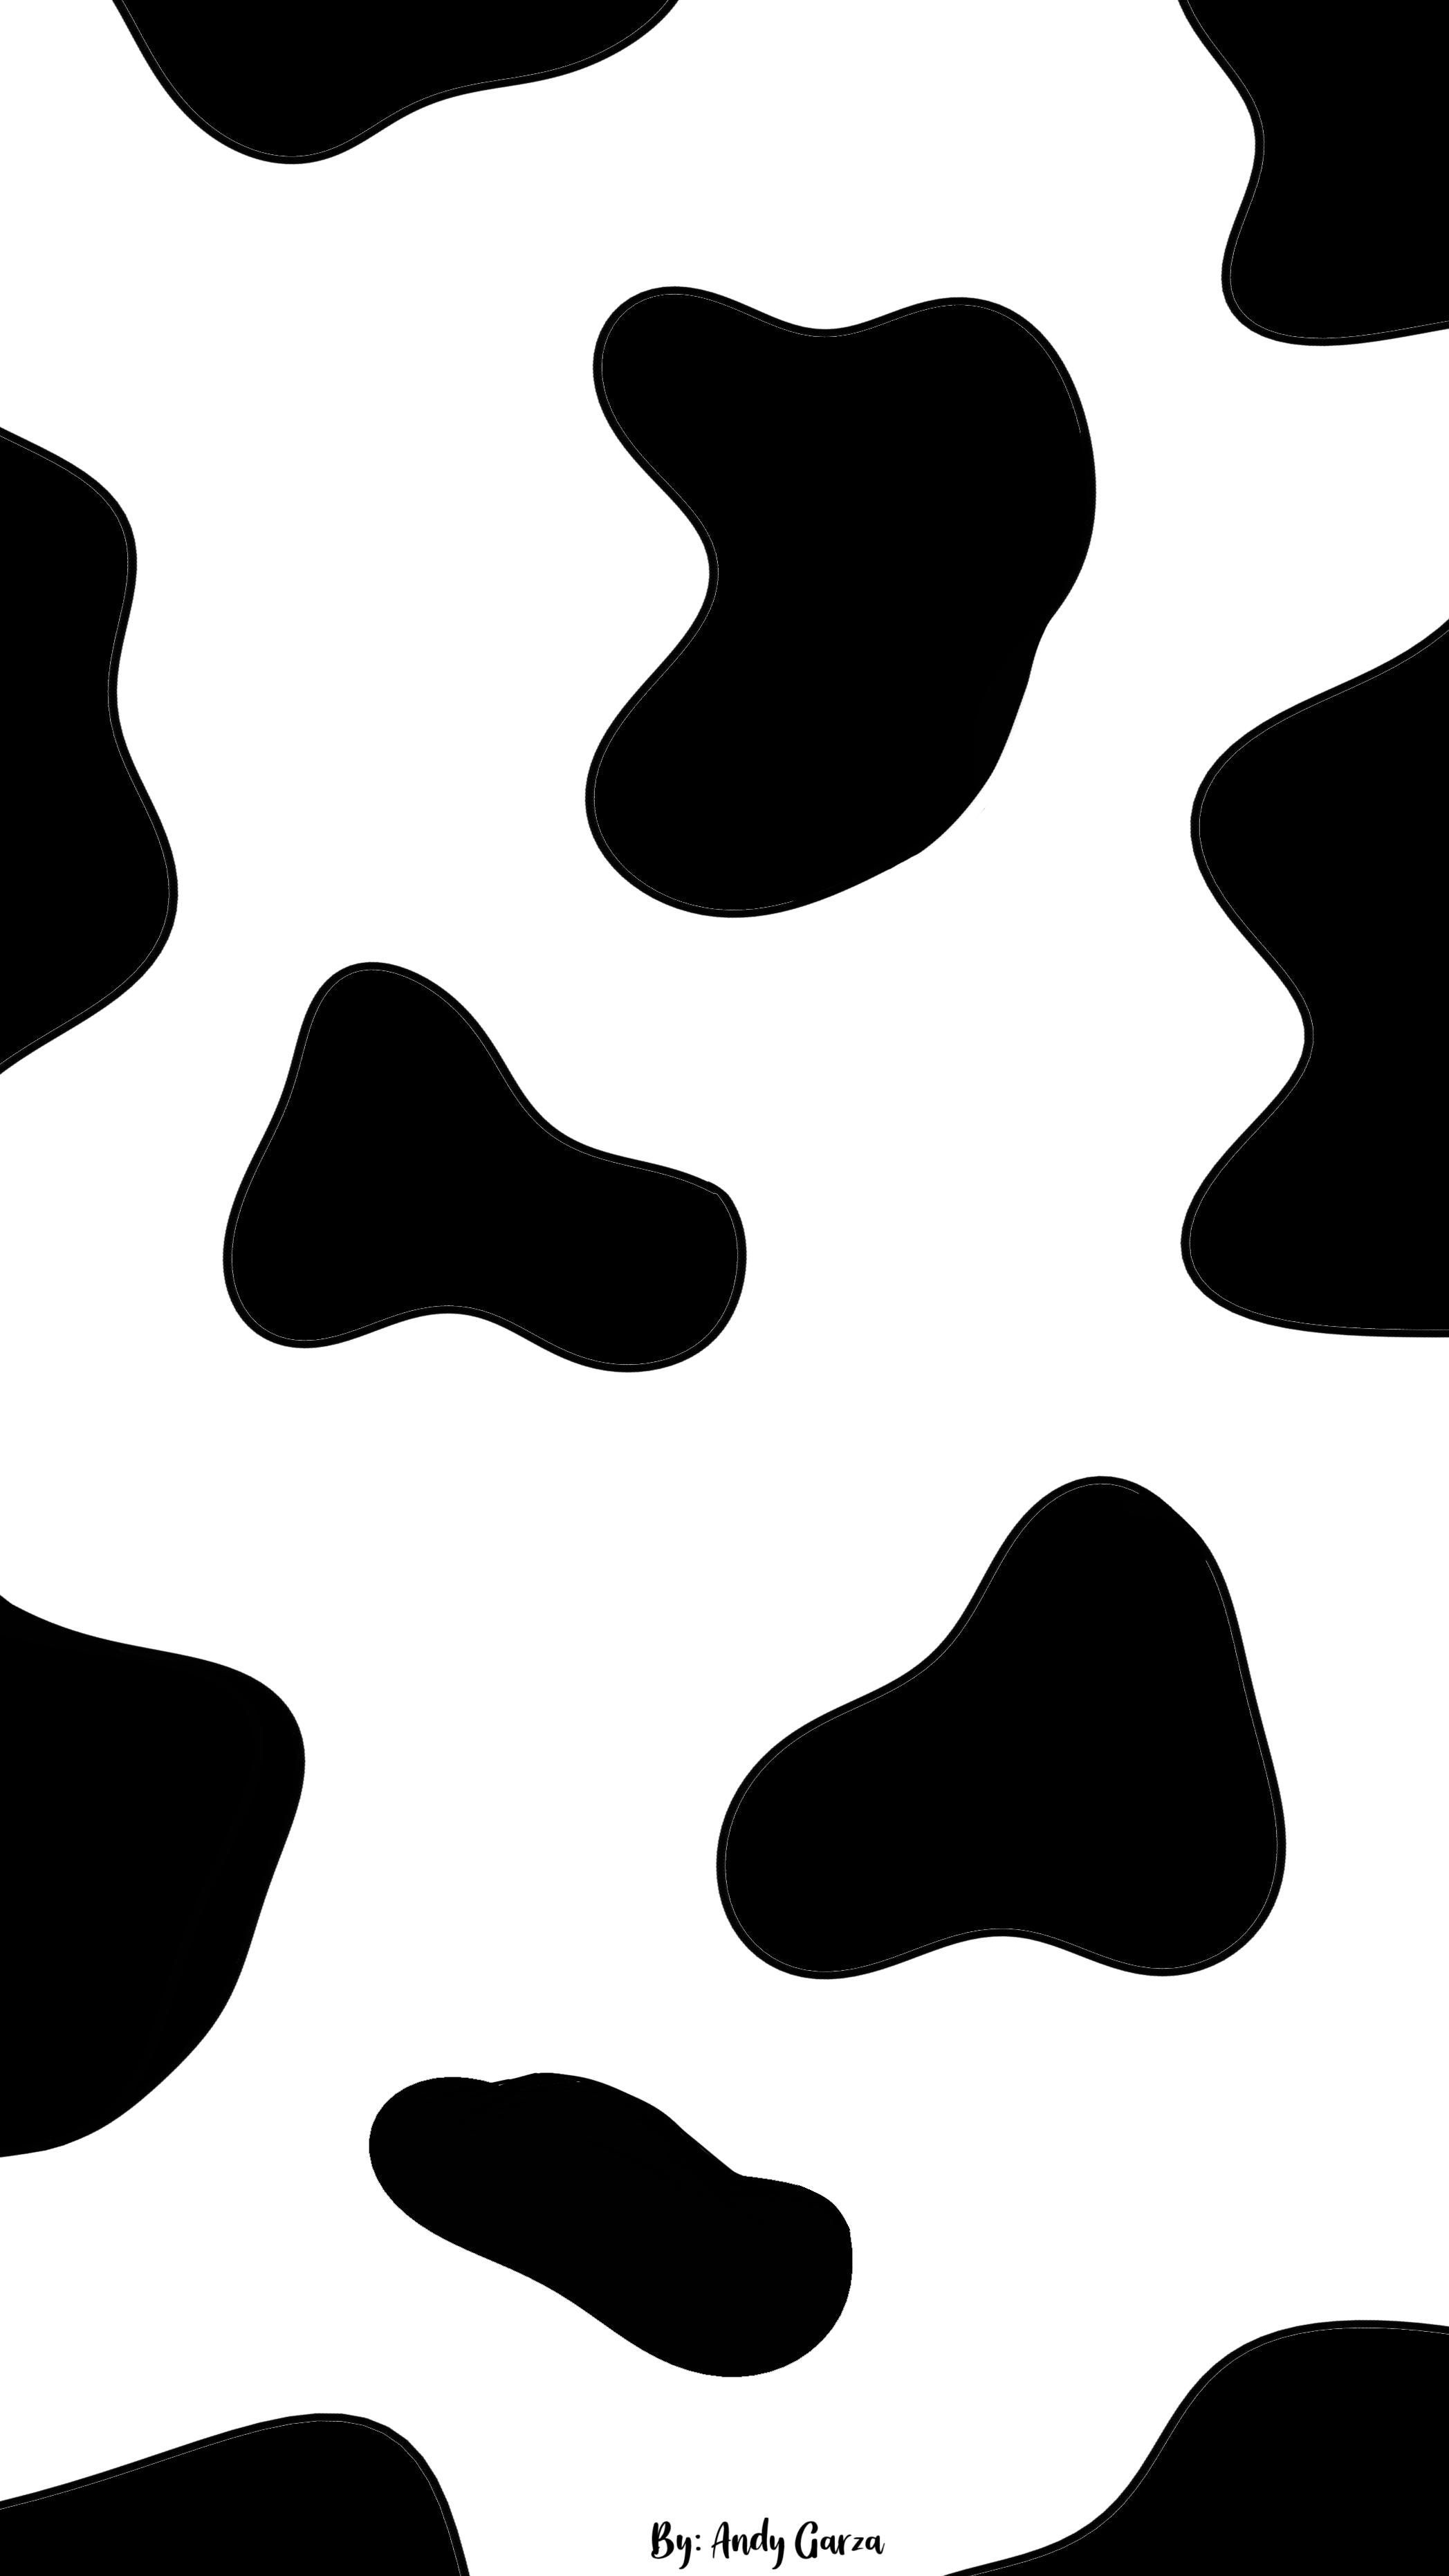 COW WALLPAPER- cute and aesthetic wallpaper. Cow wallpaper, iPhone wallpaper pattern, Cow print wallpaper